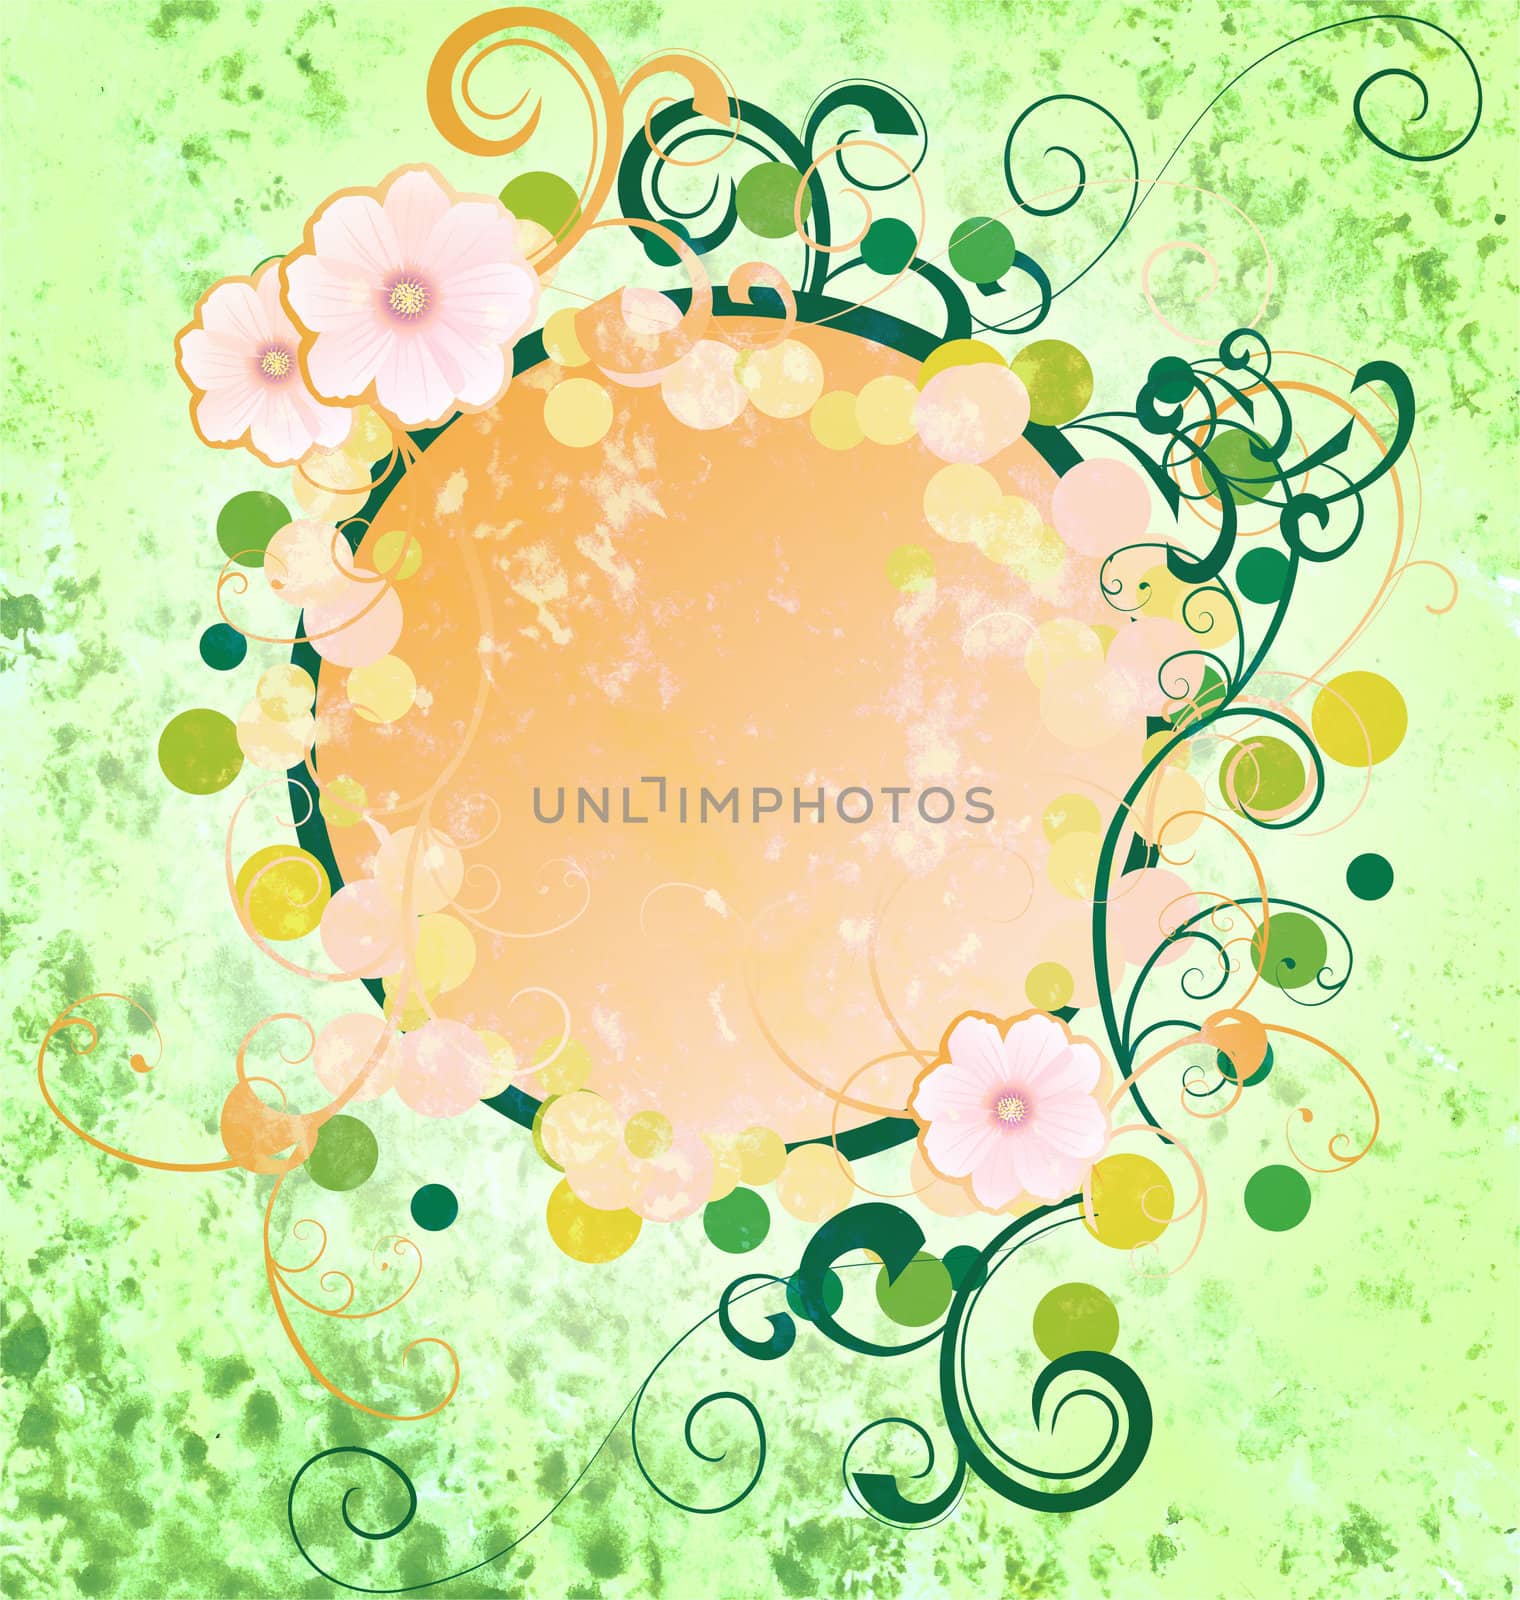 grunge green spring frame with cosmos flowers and flourishes hol by CherJu